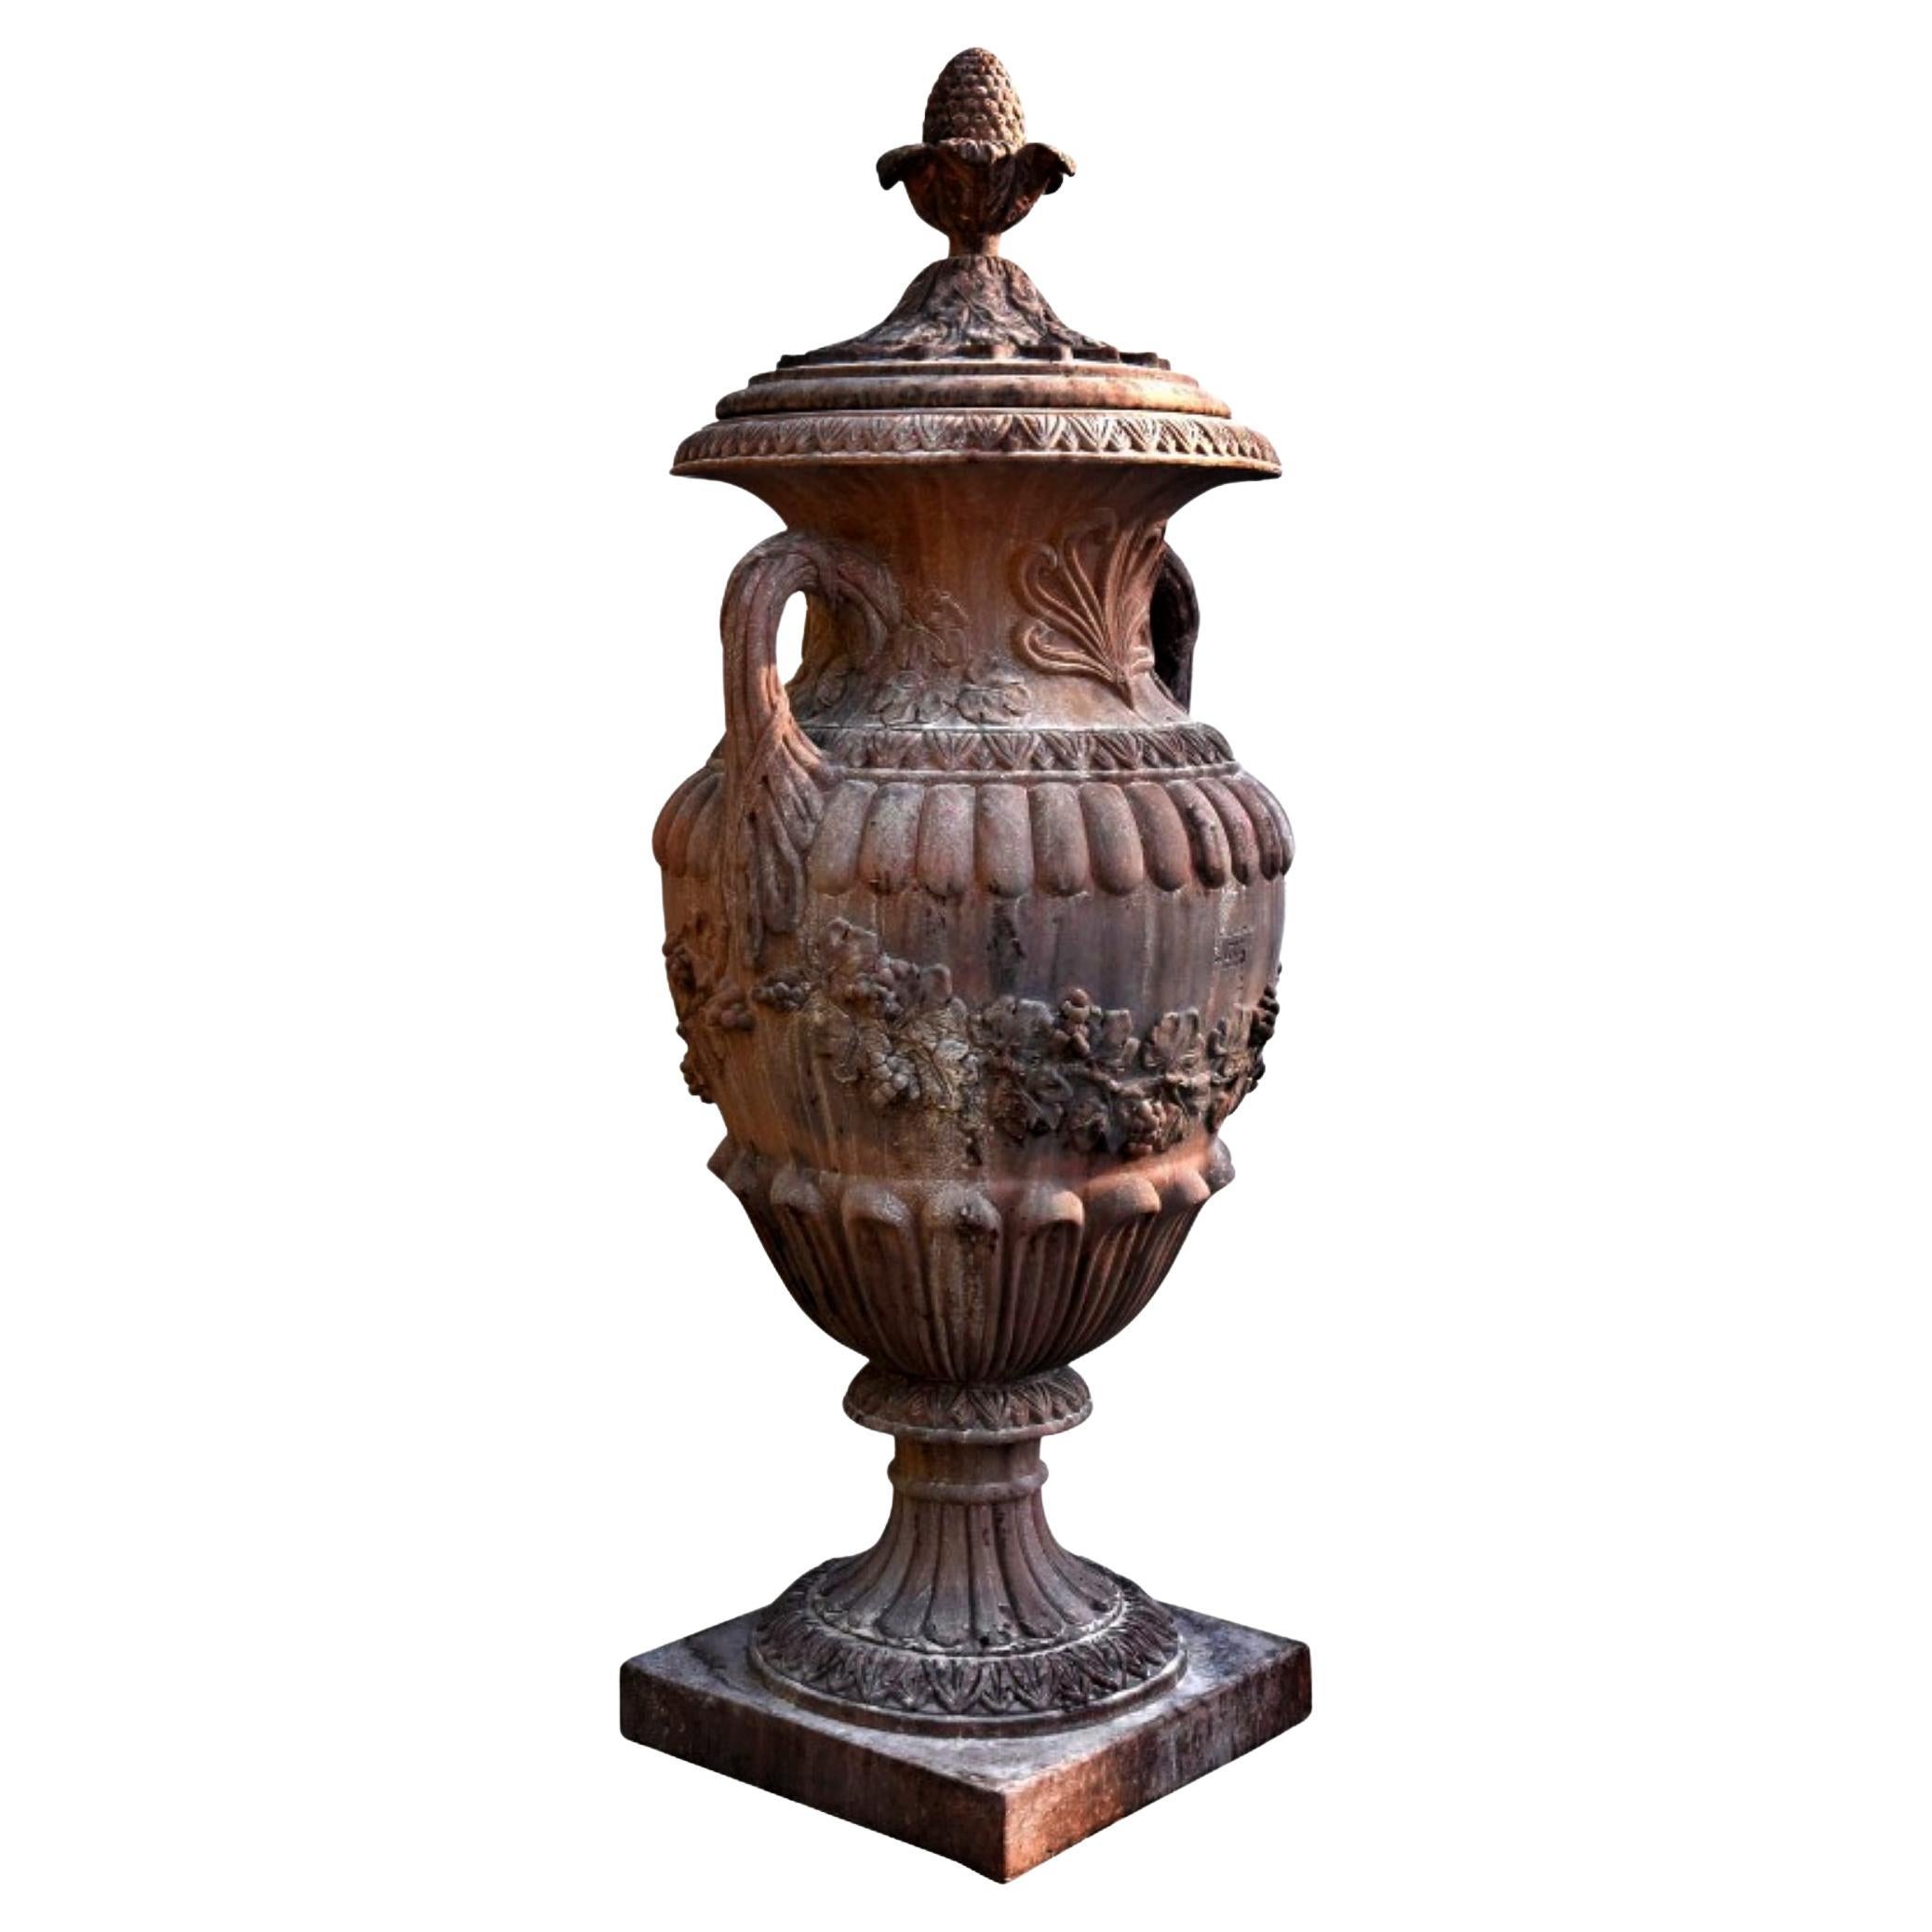 Large Ornamental Terracotta Vase with Grape Branches, Early 20th Century